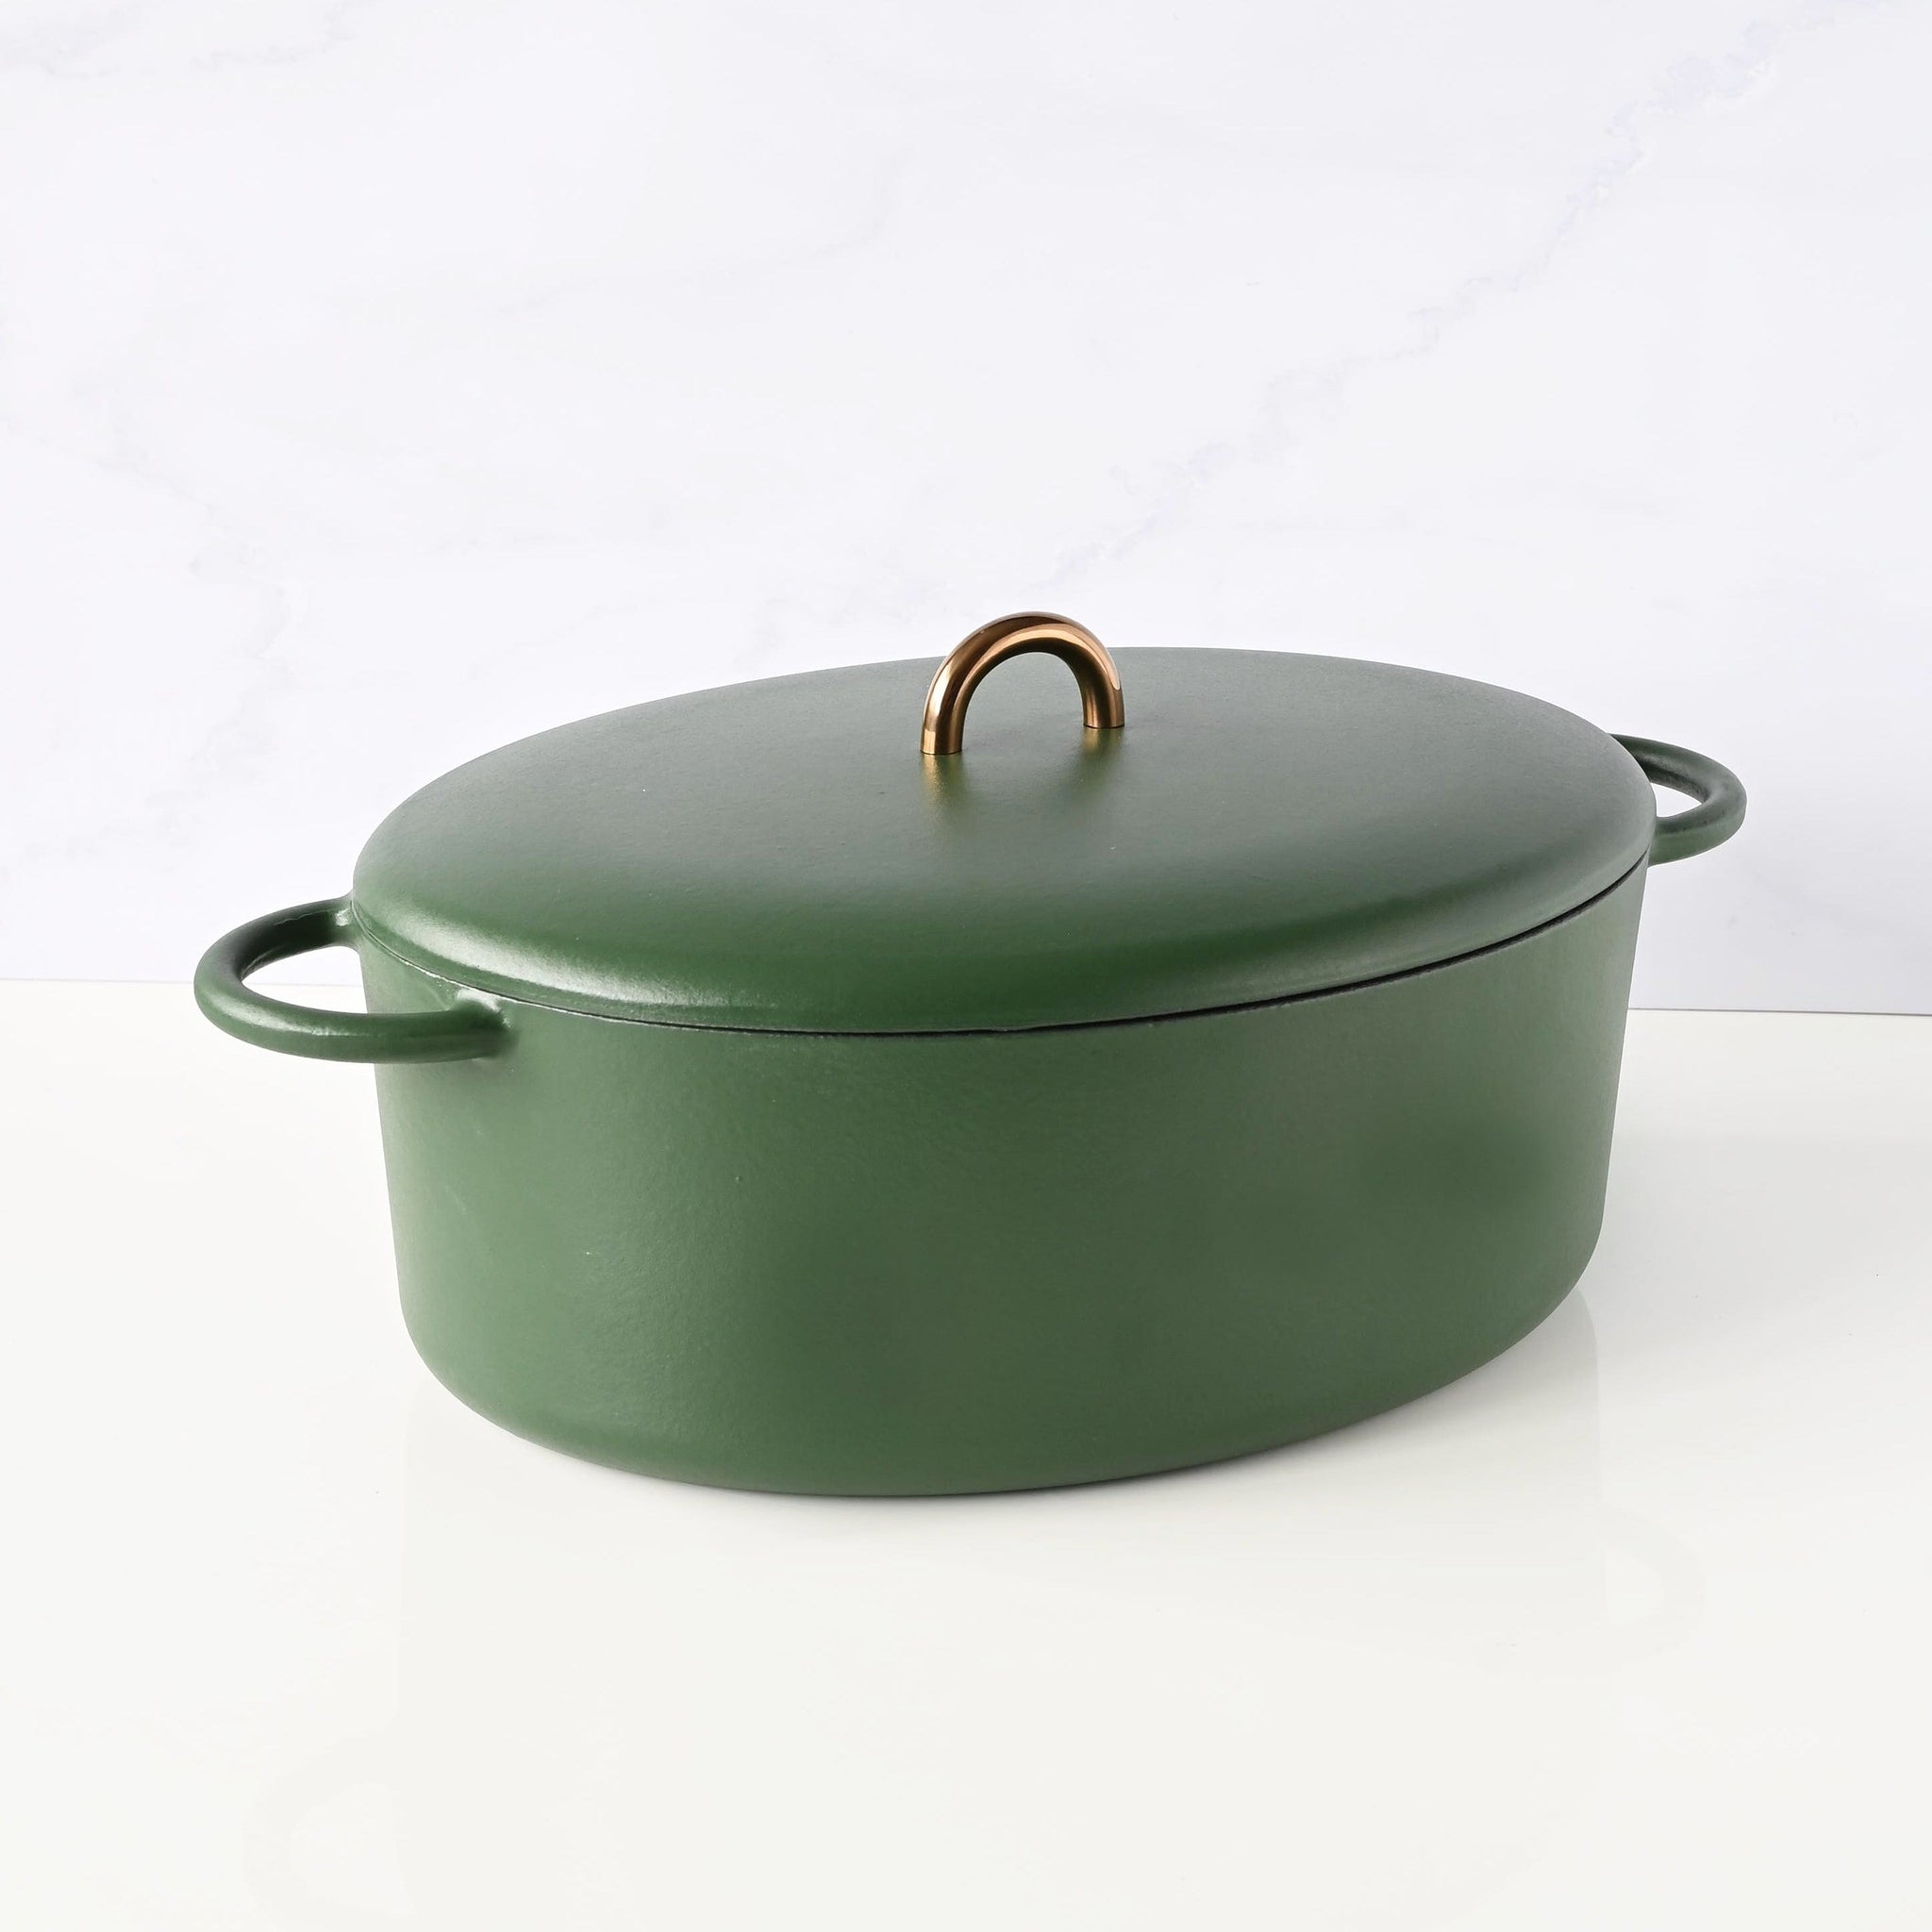 Thermomix-New-Zealand Thermomix NZ Cast Iron Dutch Oven Bakeware